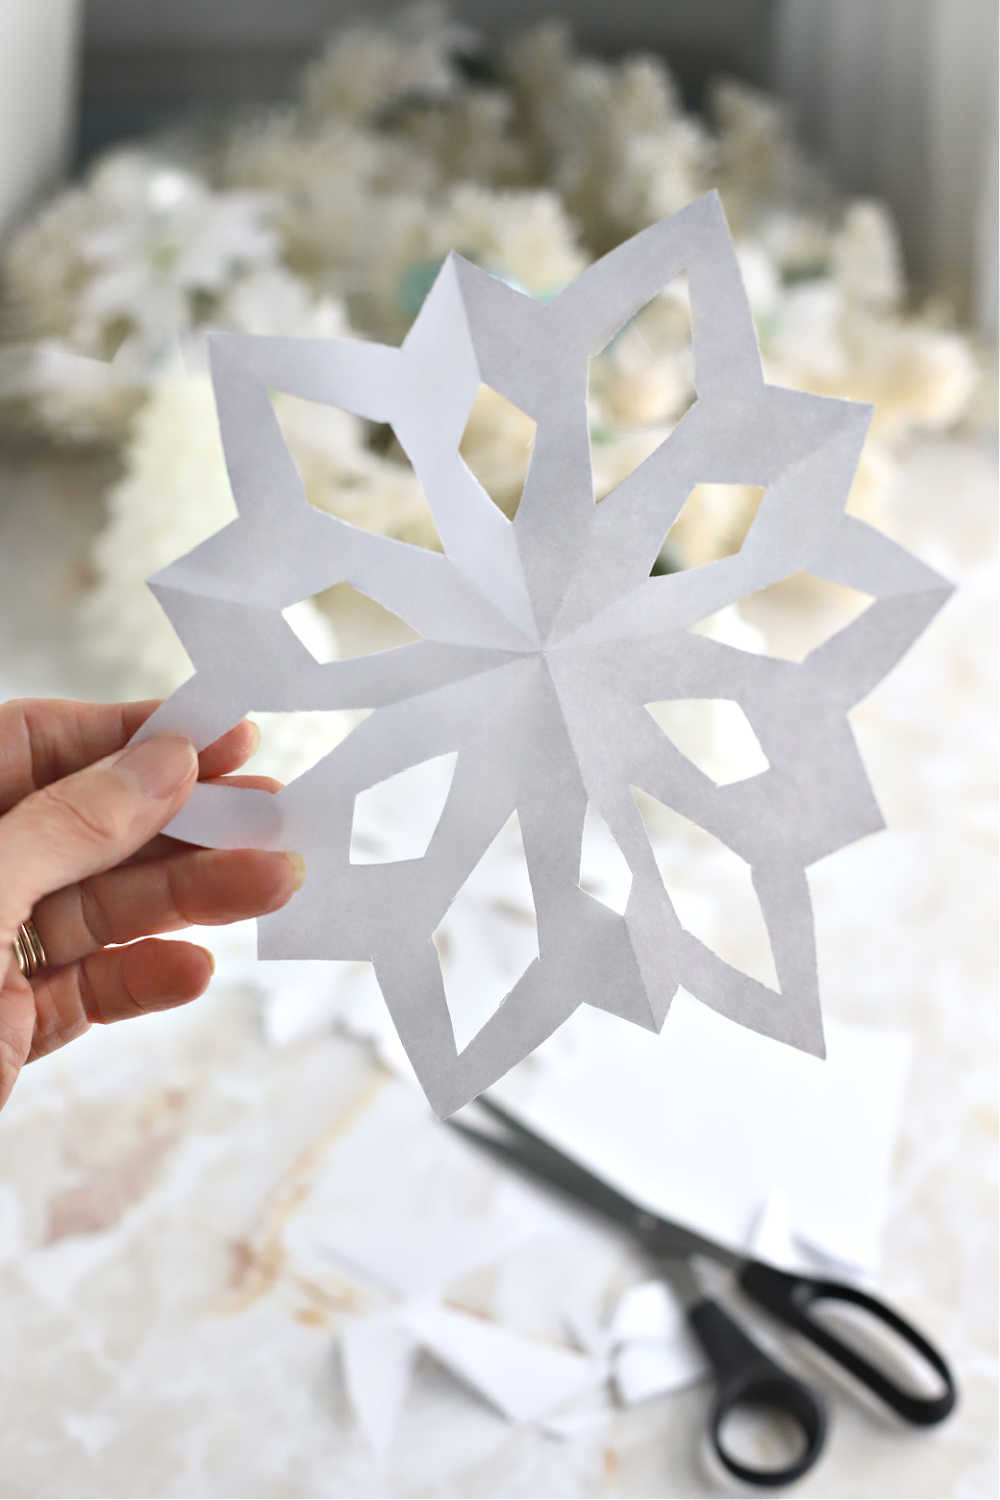 Lovely paper snowflakes.